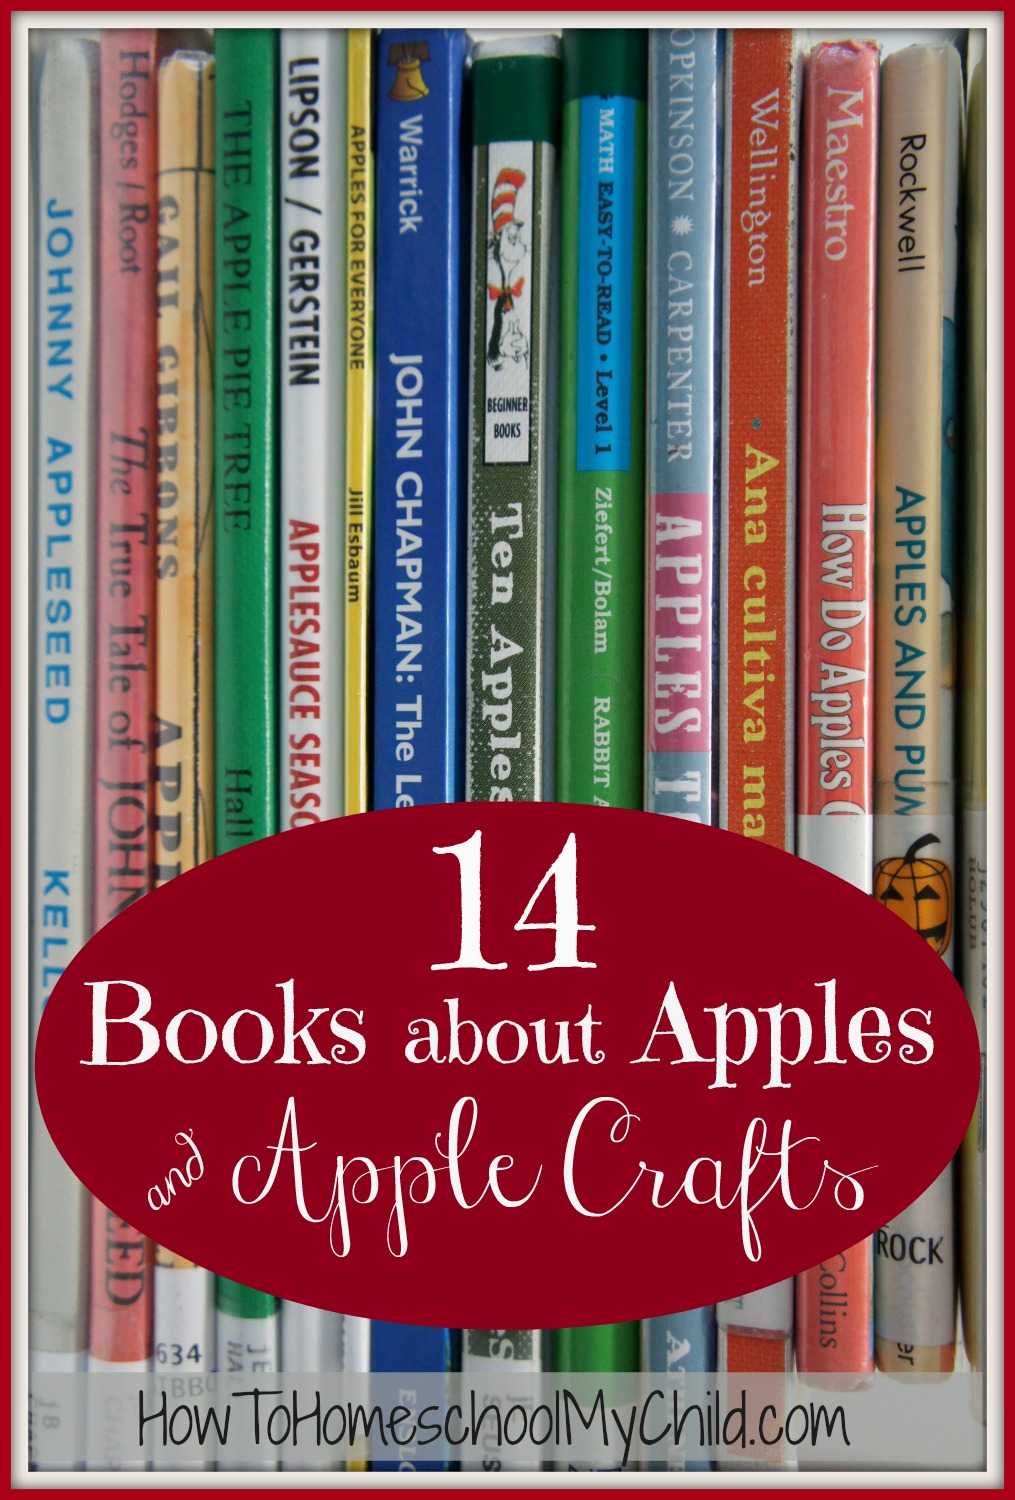 apple crafts from 14 books about apples | HowToHomeschoolMyChild.com